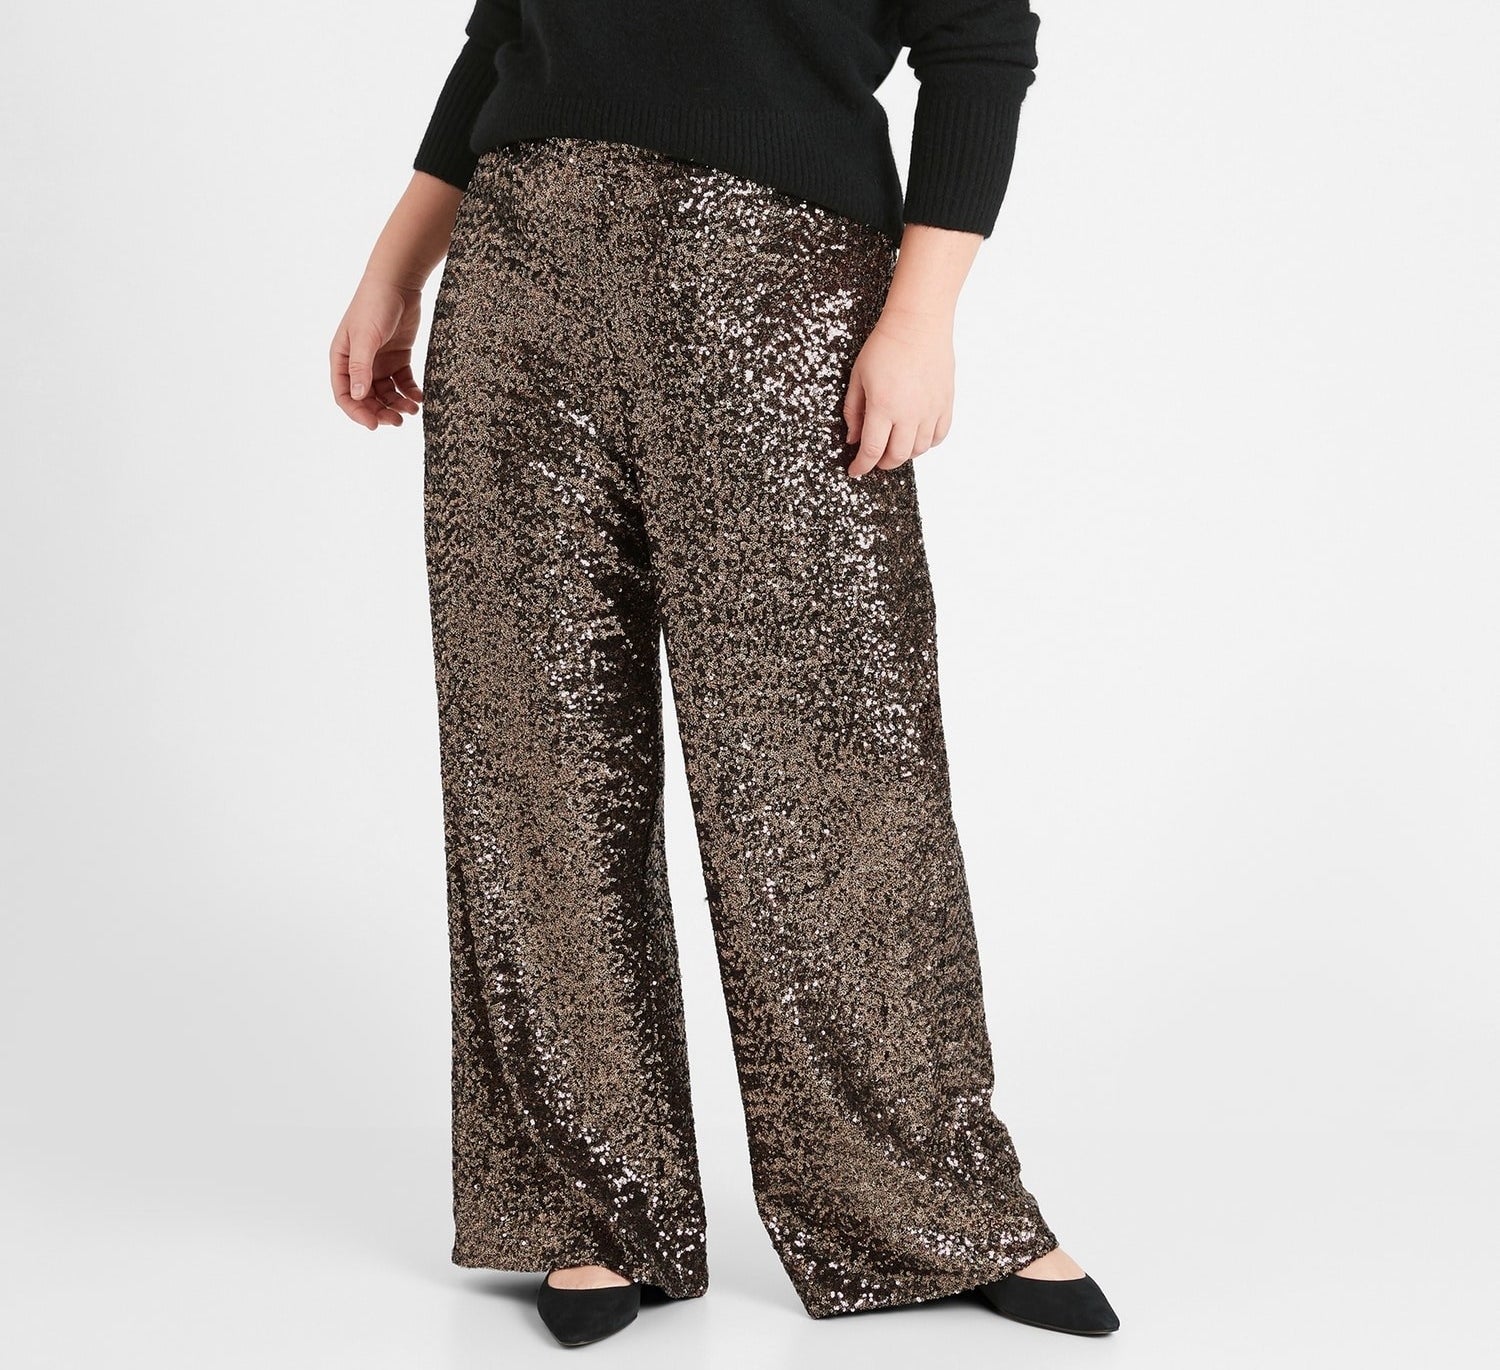 A person wearing the high-rise sequin pants 